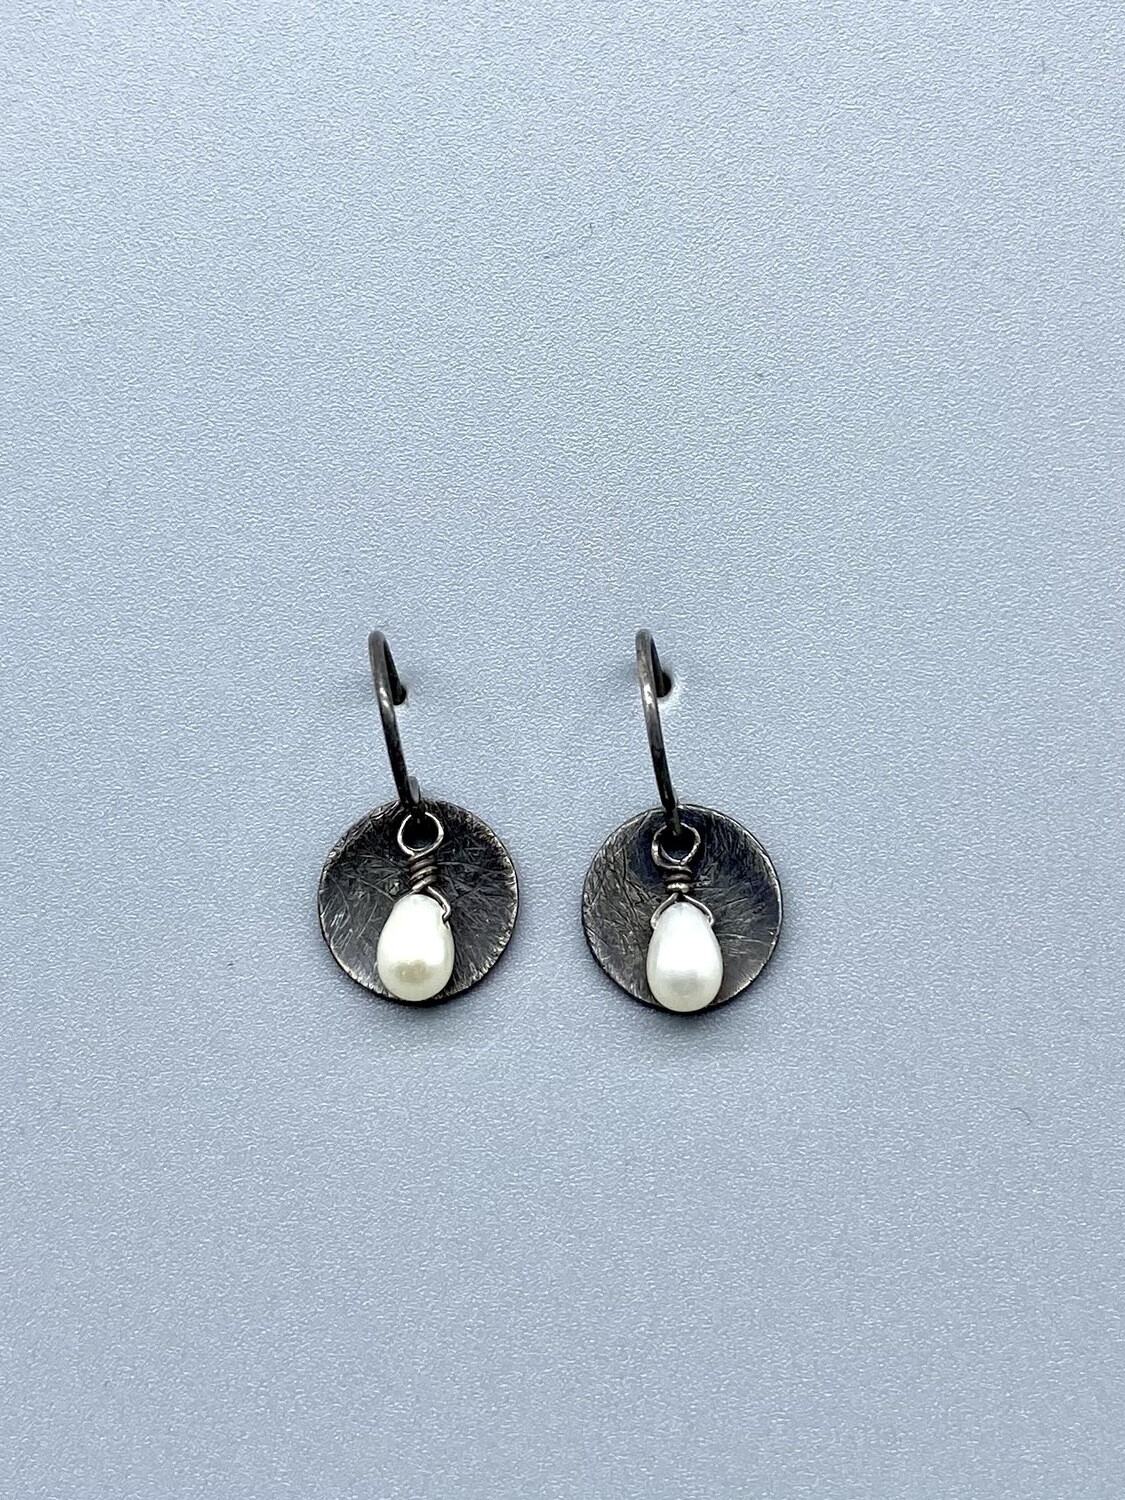 Pearl on Simple Oxidized Sterling Silver Cup Earrings - Calliope - Seattle WA